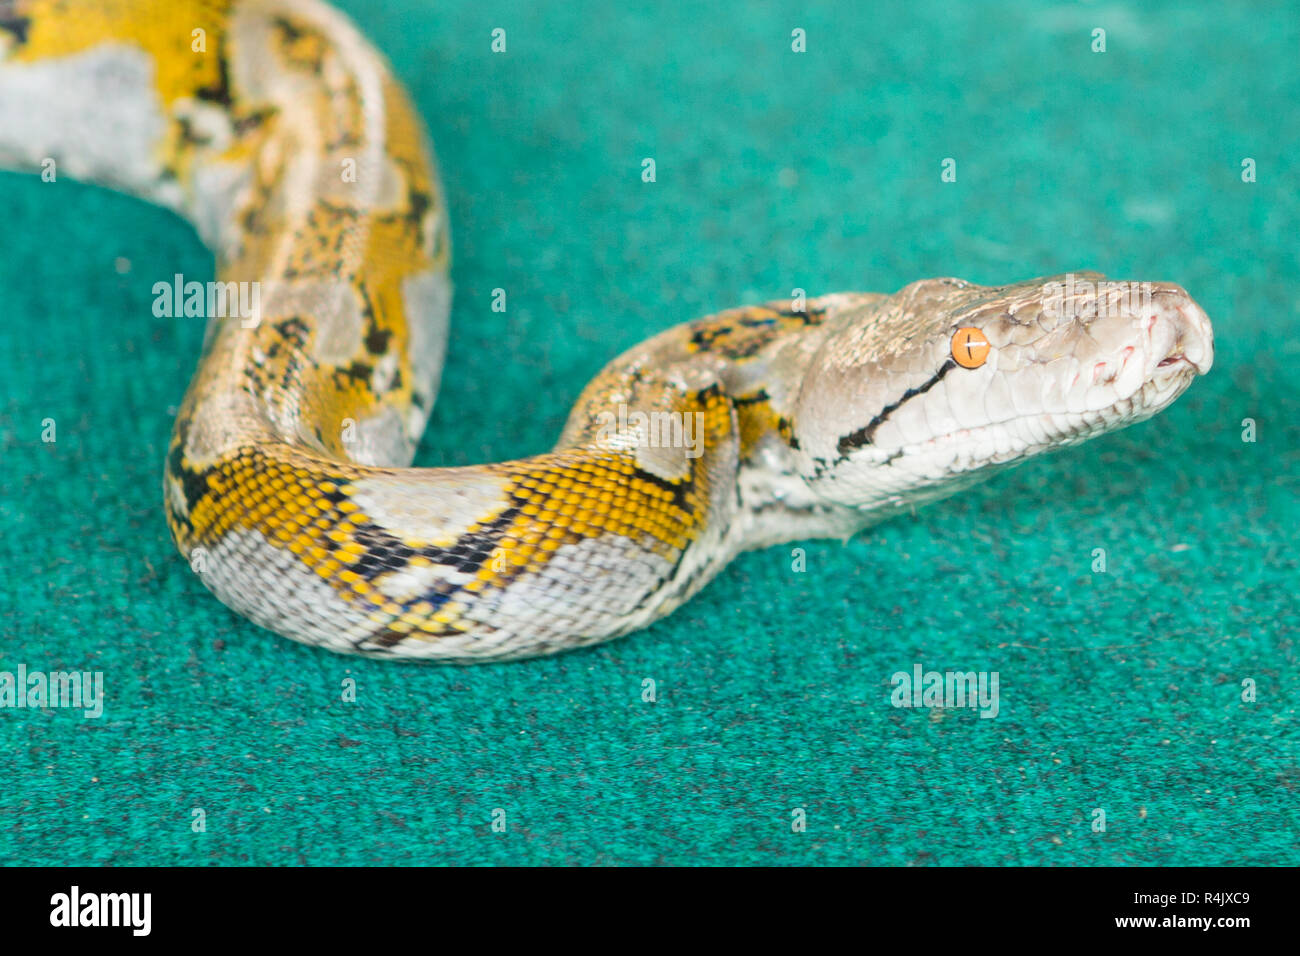 pattaya,thailand - january 2017: show snakes by playing with a snake during the Stock Photo